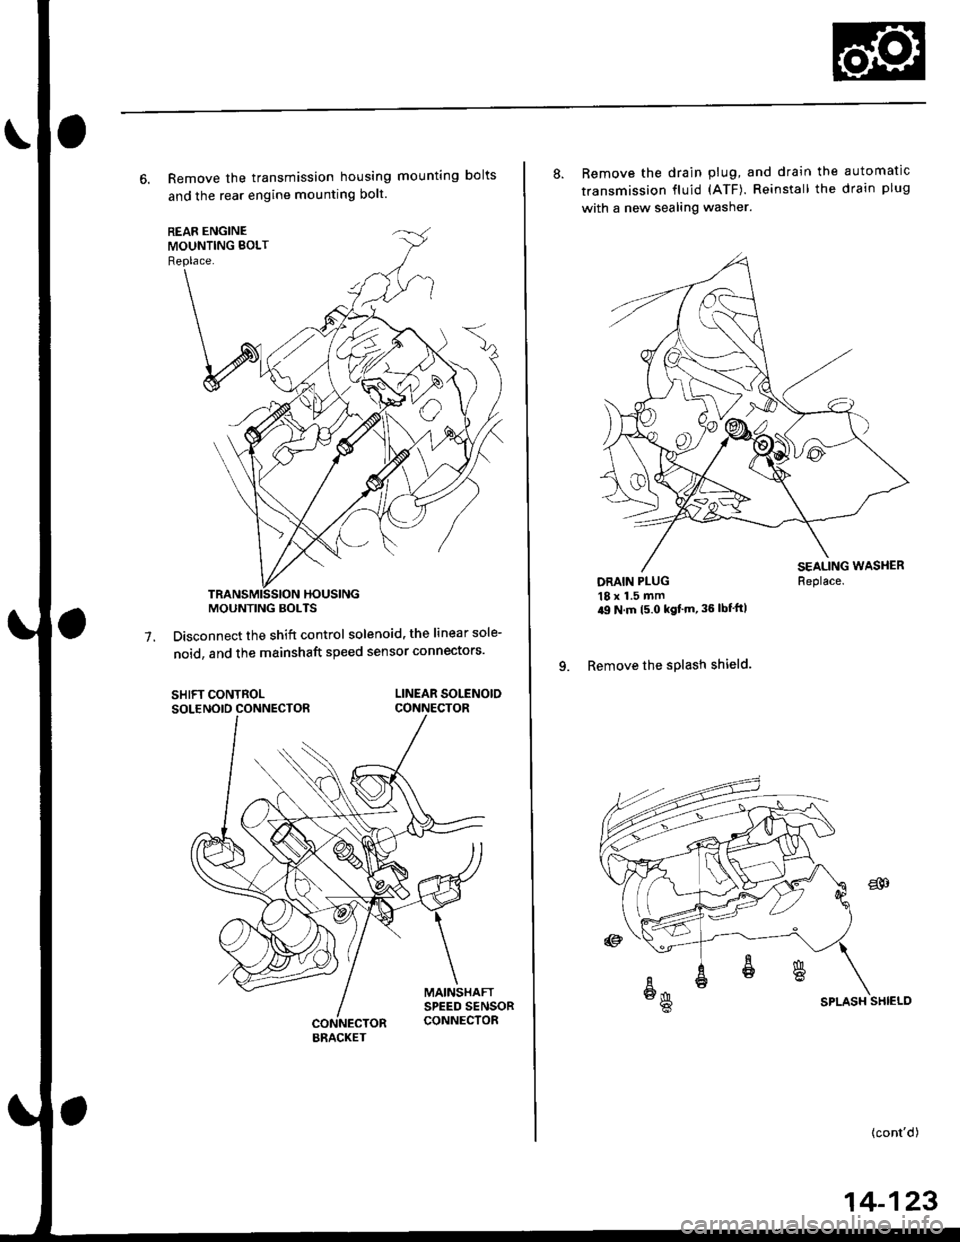 HONDA CIVIC 1998 6.G Workshop Manual 6. Remove the transmission housing mounting bolts
and the rear engine mounting bolt.
Disconnect the shift control solenoid, the linear sole-
noid, and the mainshaft speed sensor connectors7.
SHIFT CO